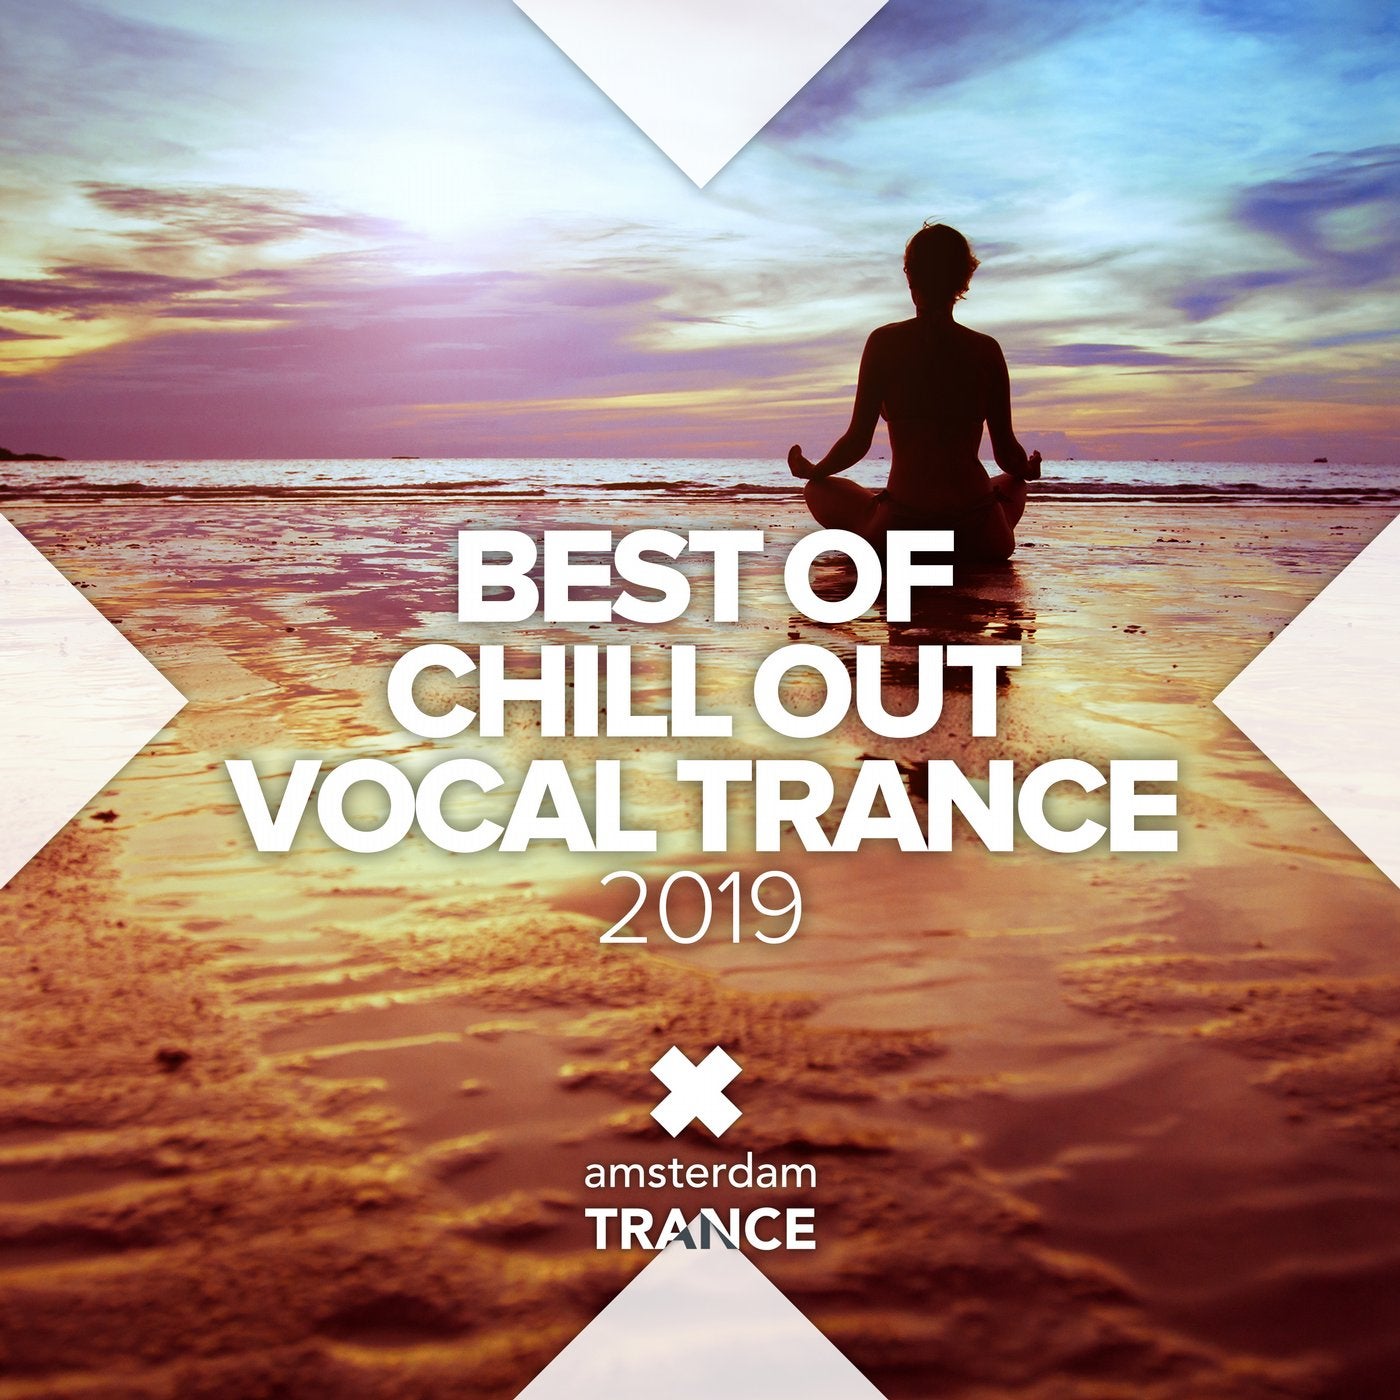 Best of Chill Out Vocal Trance 2019